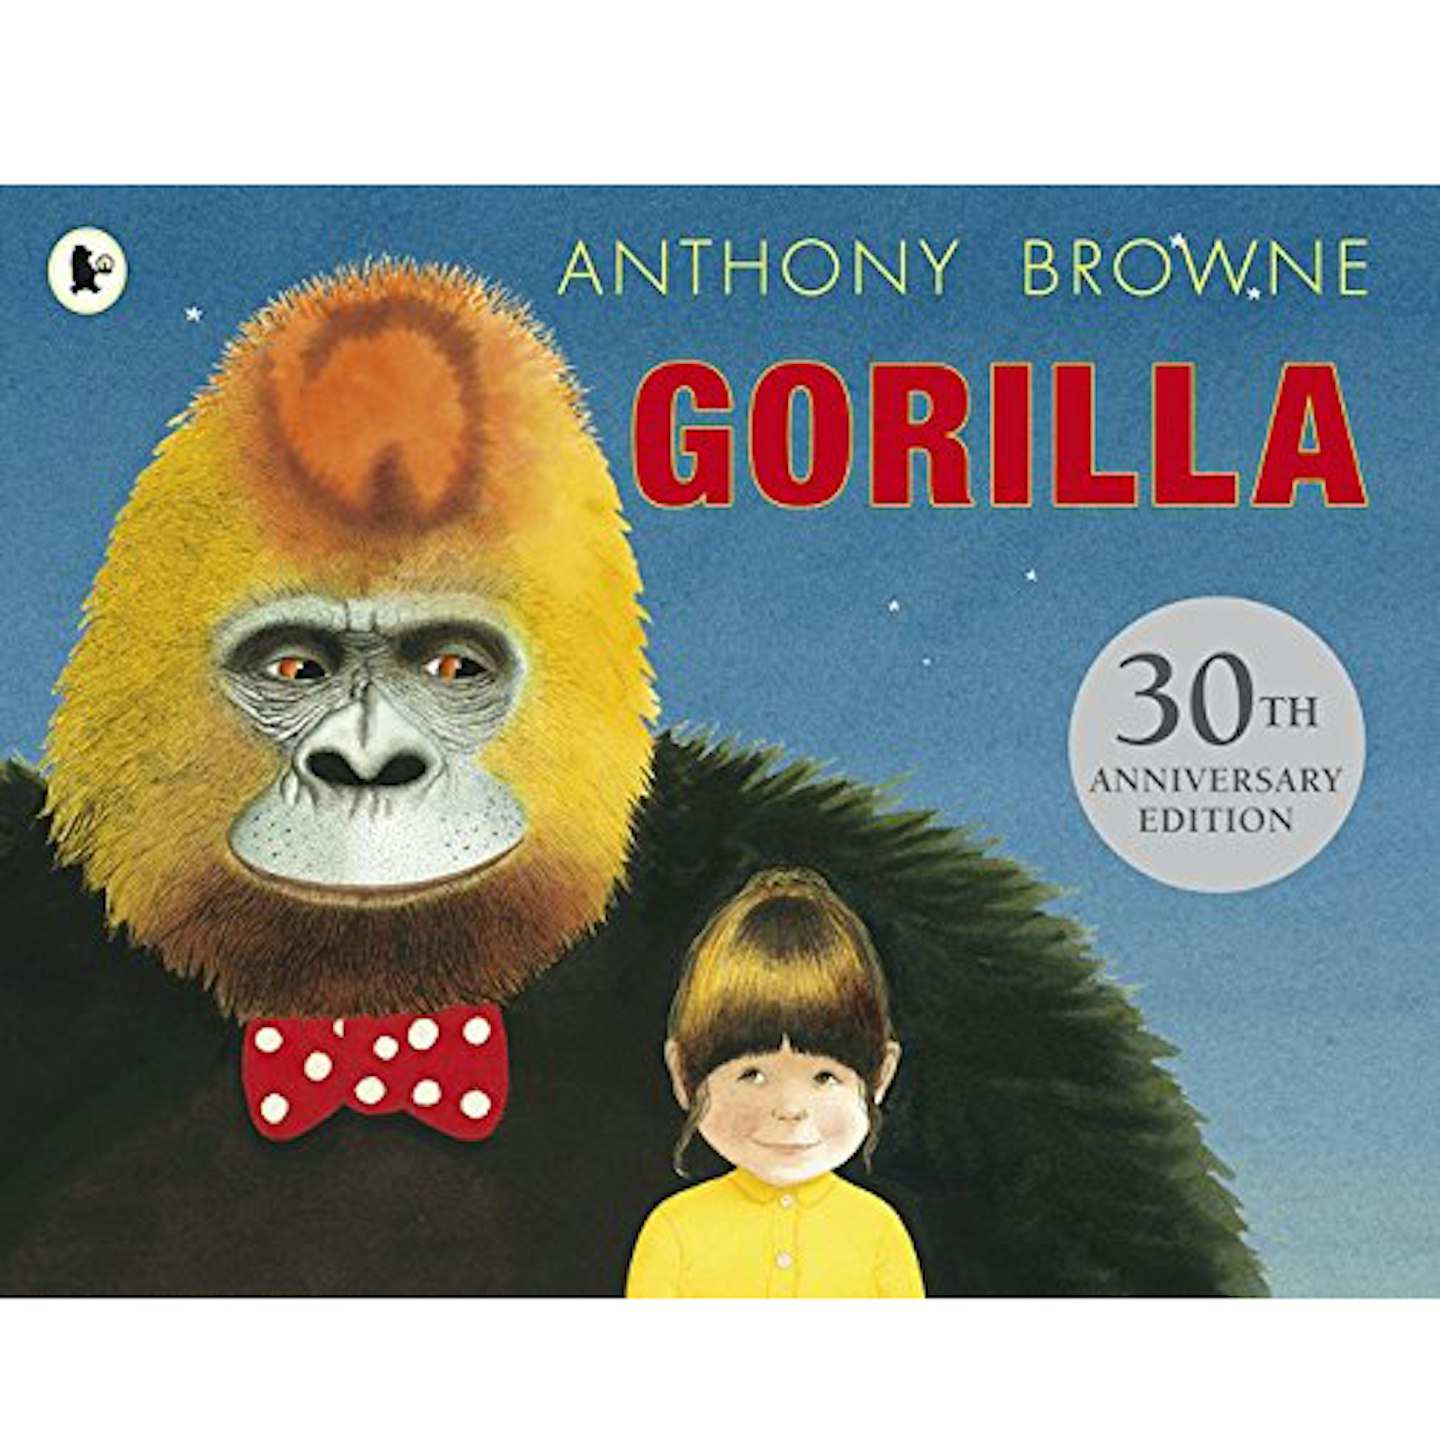 Gorilla by Anthony Browne